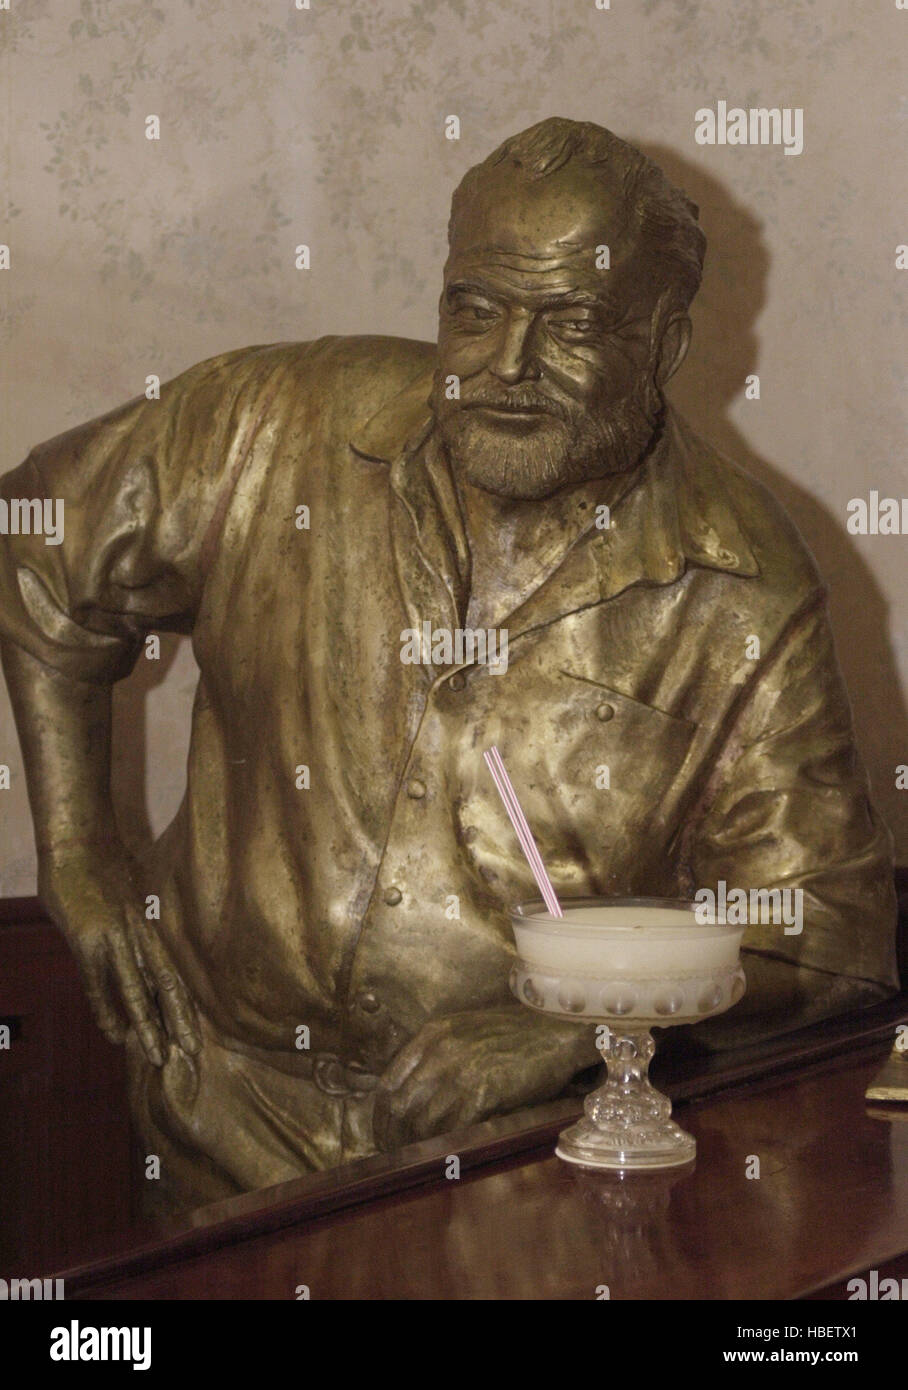 Photo File/ HAVANA, CUBA: Ernest Hemingway statue is seen in the Restorant 'Floridita' place frequented drink 'Daiquiri'.  American group led by U.S. Rep. James McGovern, a Massachusetts Democrat, signed an agreement to collaborate on the restoration and preservation of 2,000 letters, 3,000 personal photographs and some draft fragments of novels and stories that were kept in the humid basement of Finca de Vigia, the villa outside Havana where Hemingway lived from 1939-1960. Funded by the Rockefeller Foundation, the joint effort by the New York-based Social Science Research Council and the Cuba Stock Photo